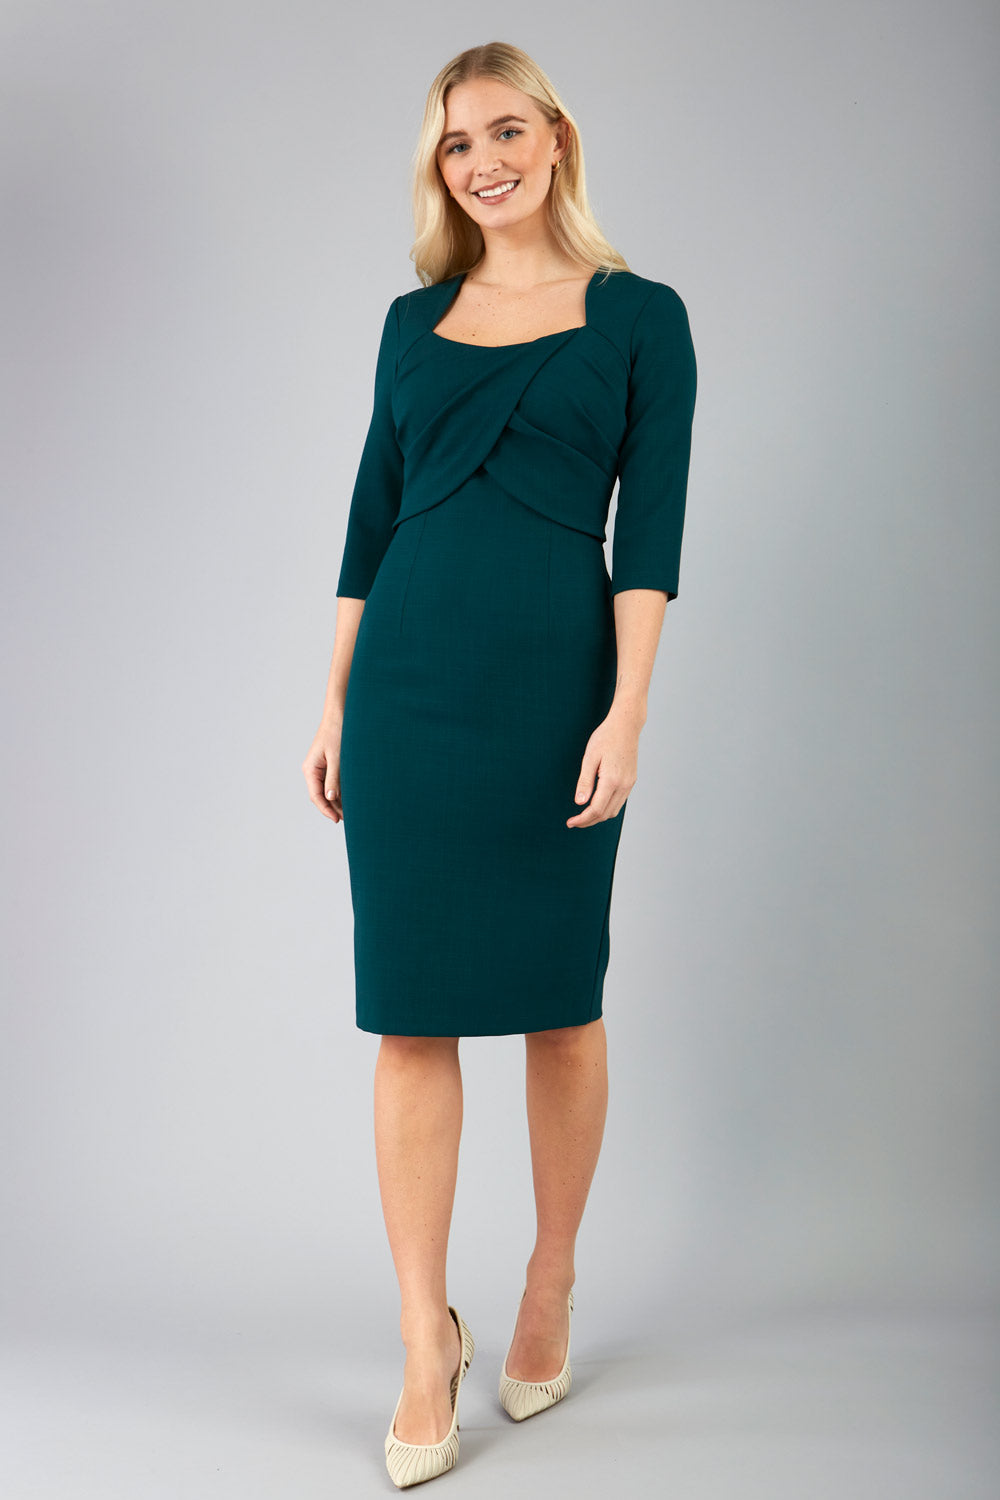 Model wearing Diva Catwalk Lantana Square Neck Pencil Dress 3/4 Sleeve in Forest Green front